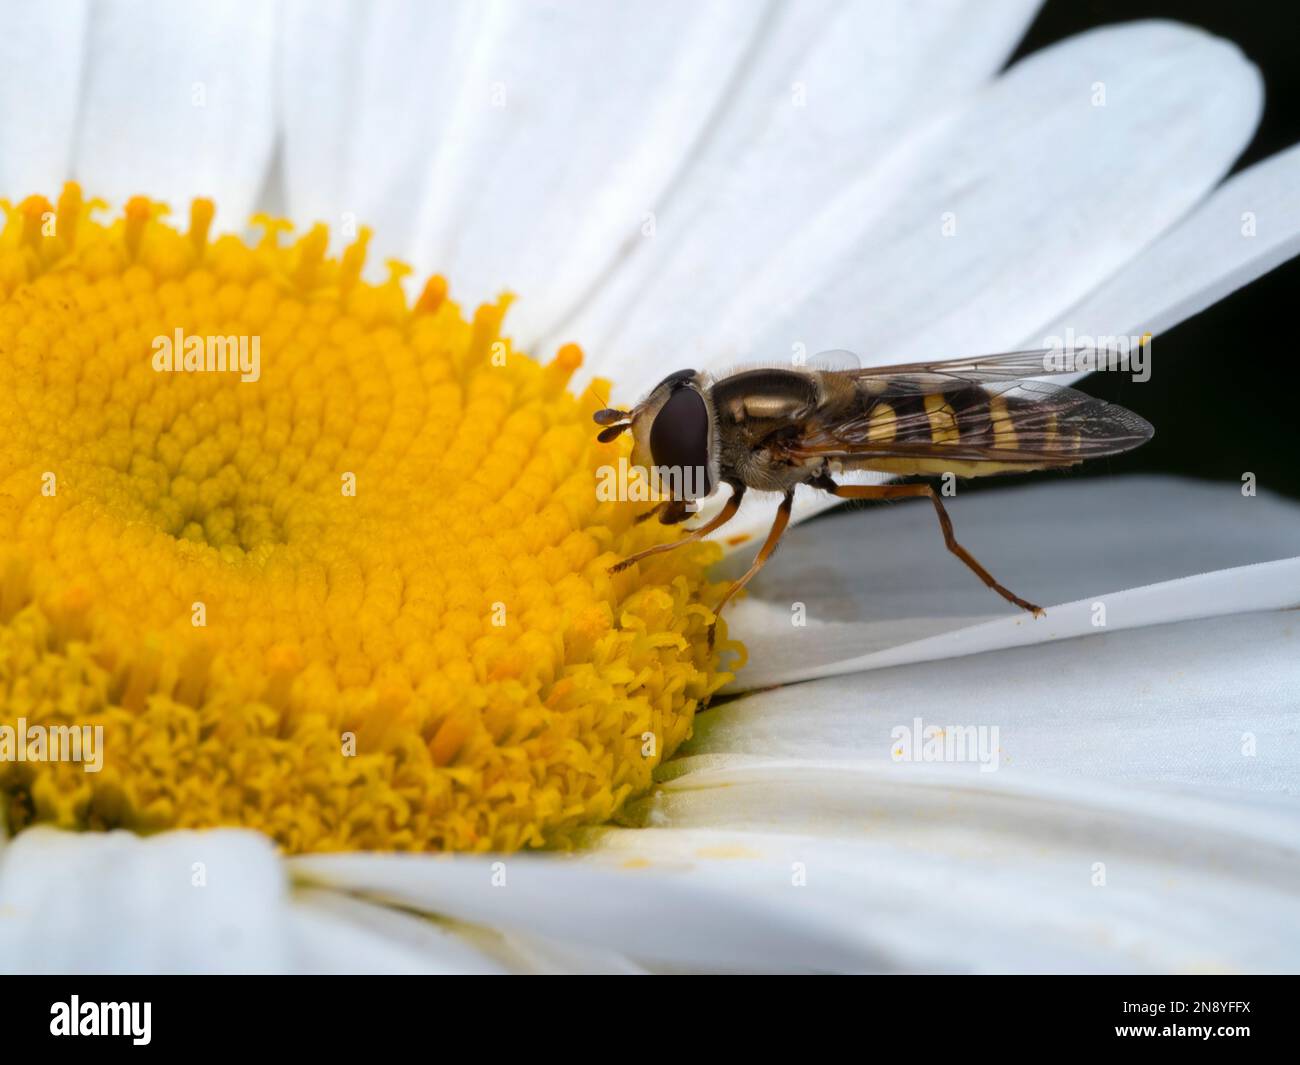 Side view of a forked globetail hover fly (Sphaerophoria sulphuripes) on a white and yellow daisy flower Stock Photo